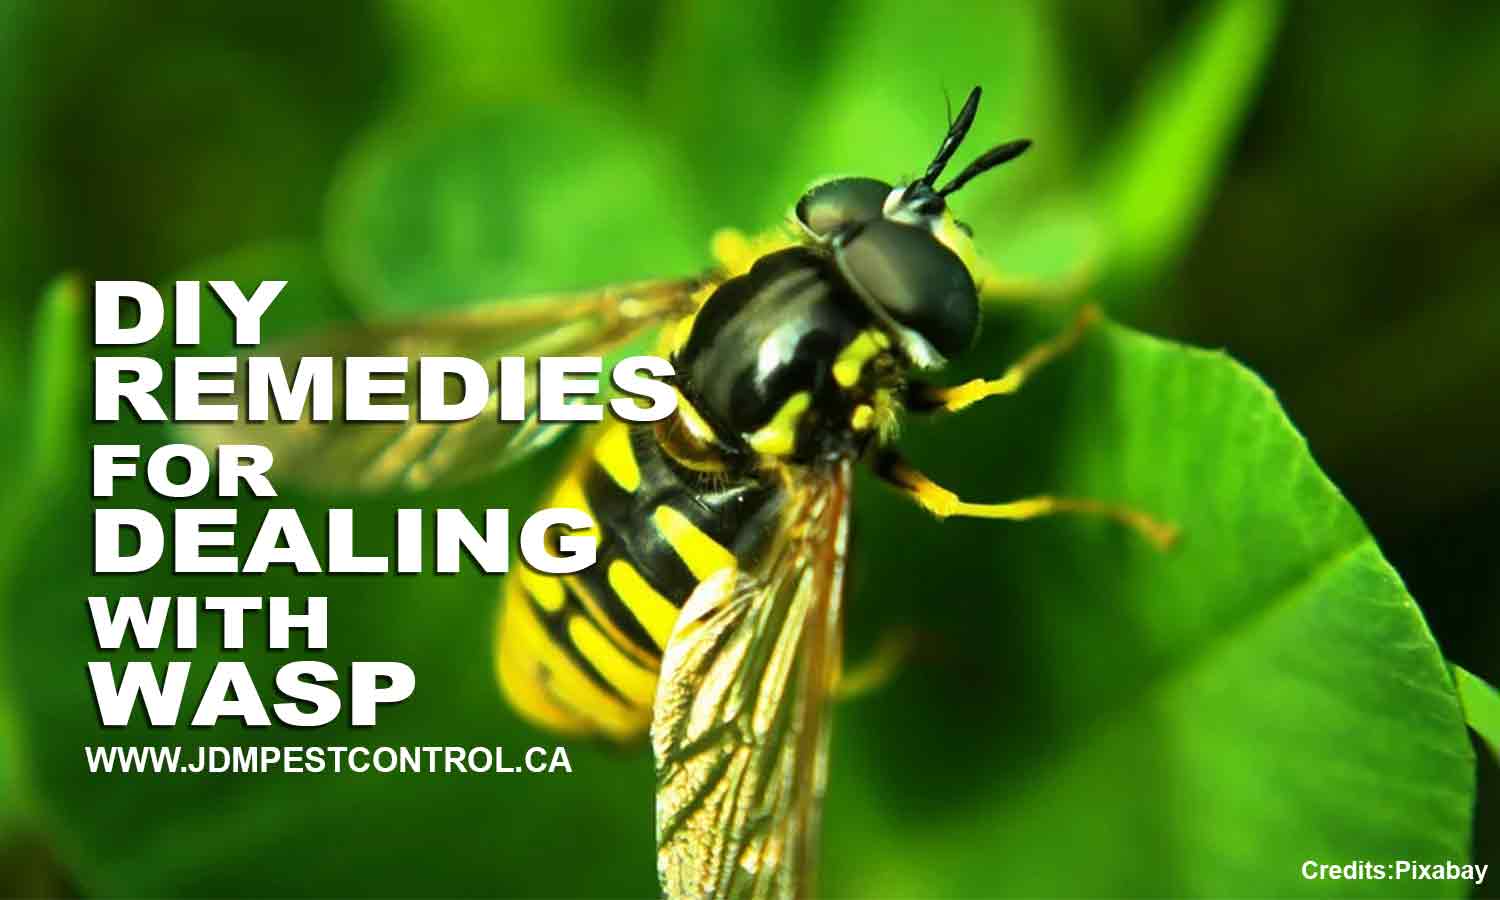 DIY Remedies for Dealing With Wasps